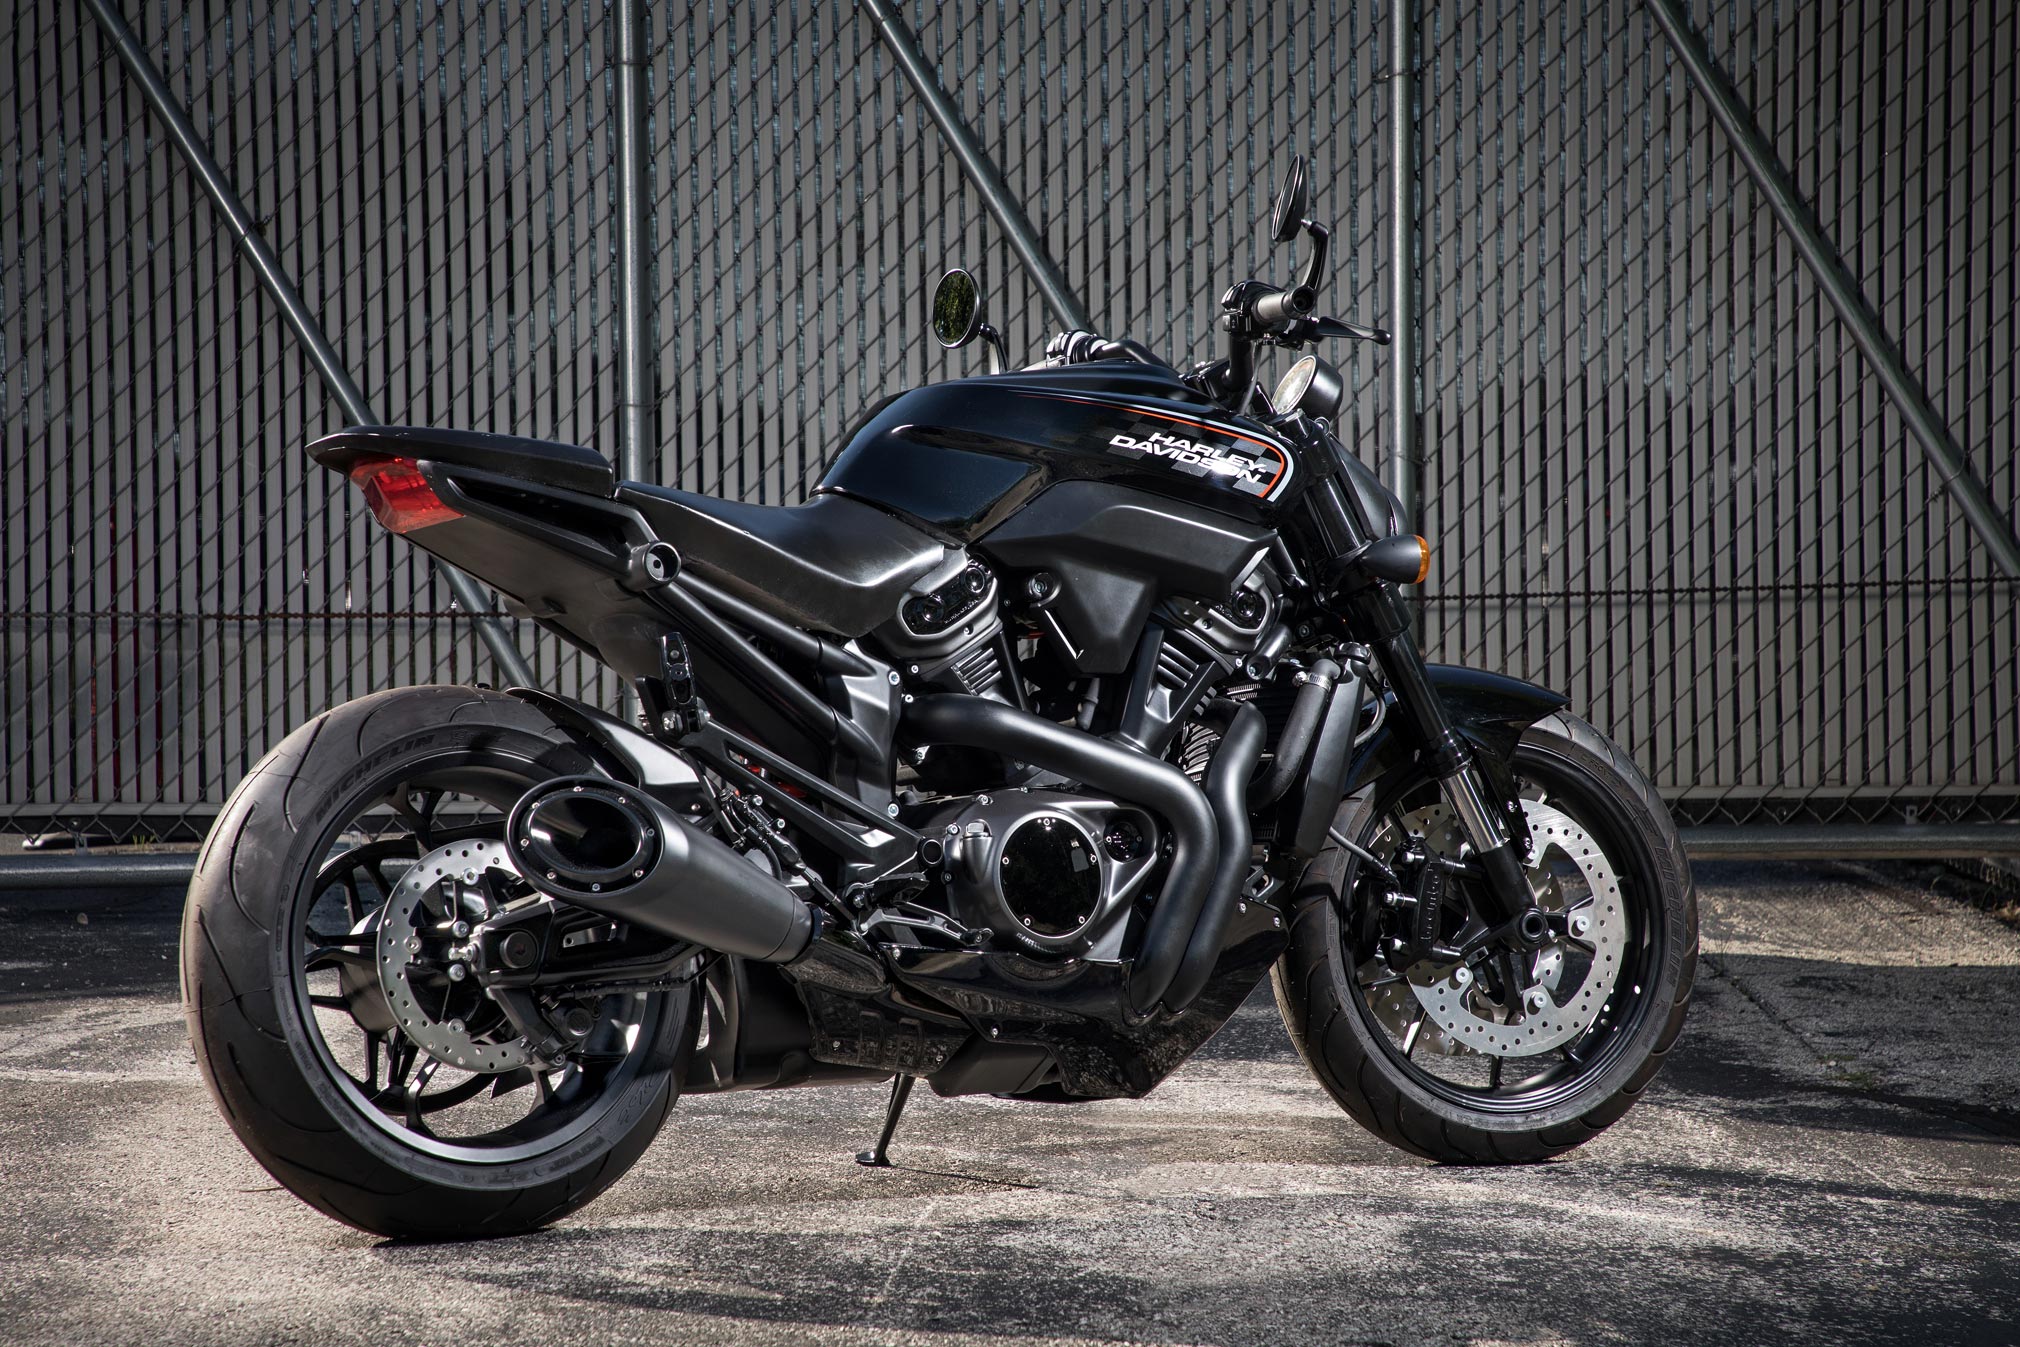 2020 Harley Davidson Streetfighter Preview Guide Total Motorcycle